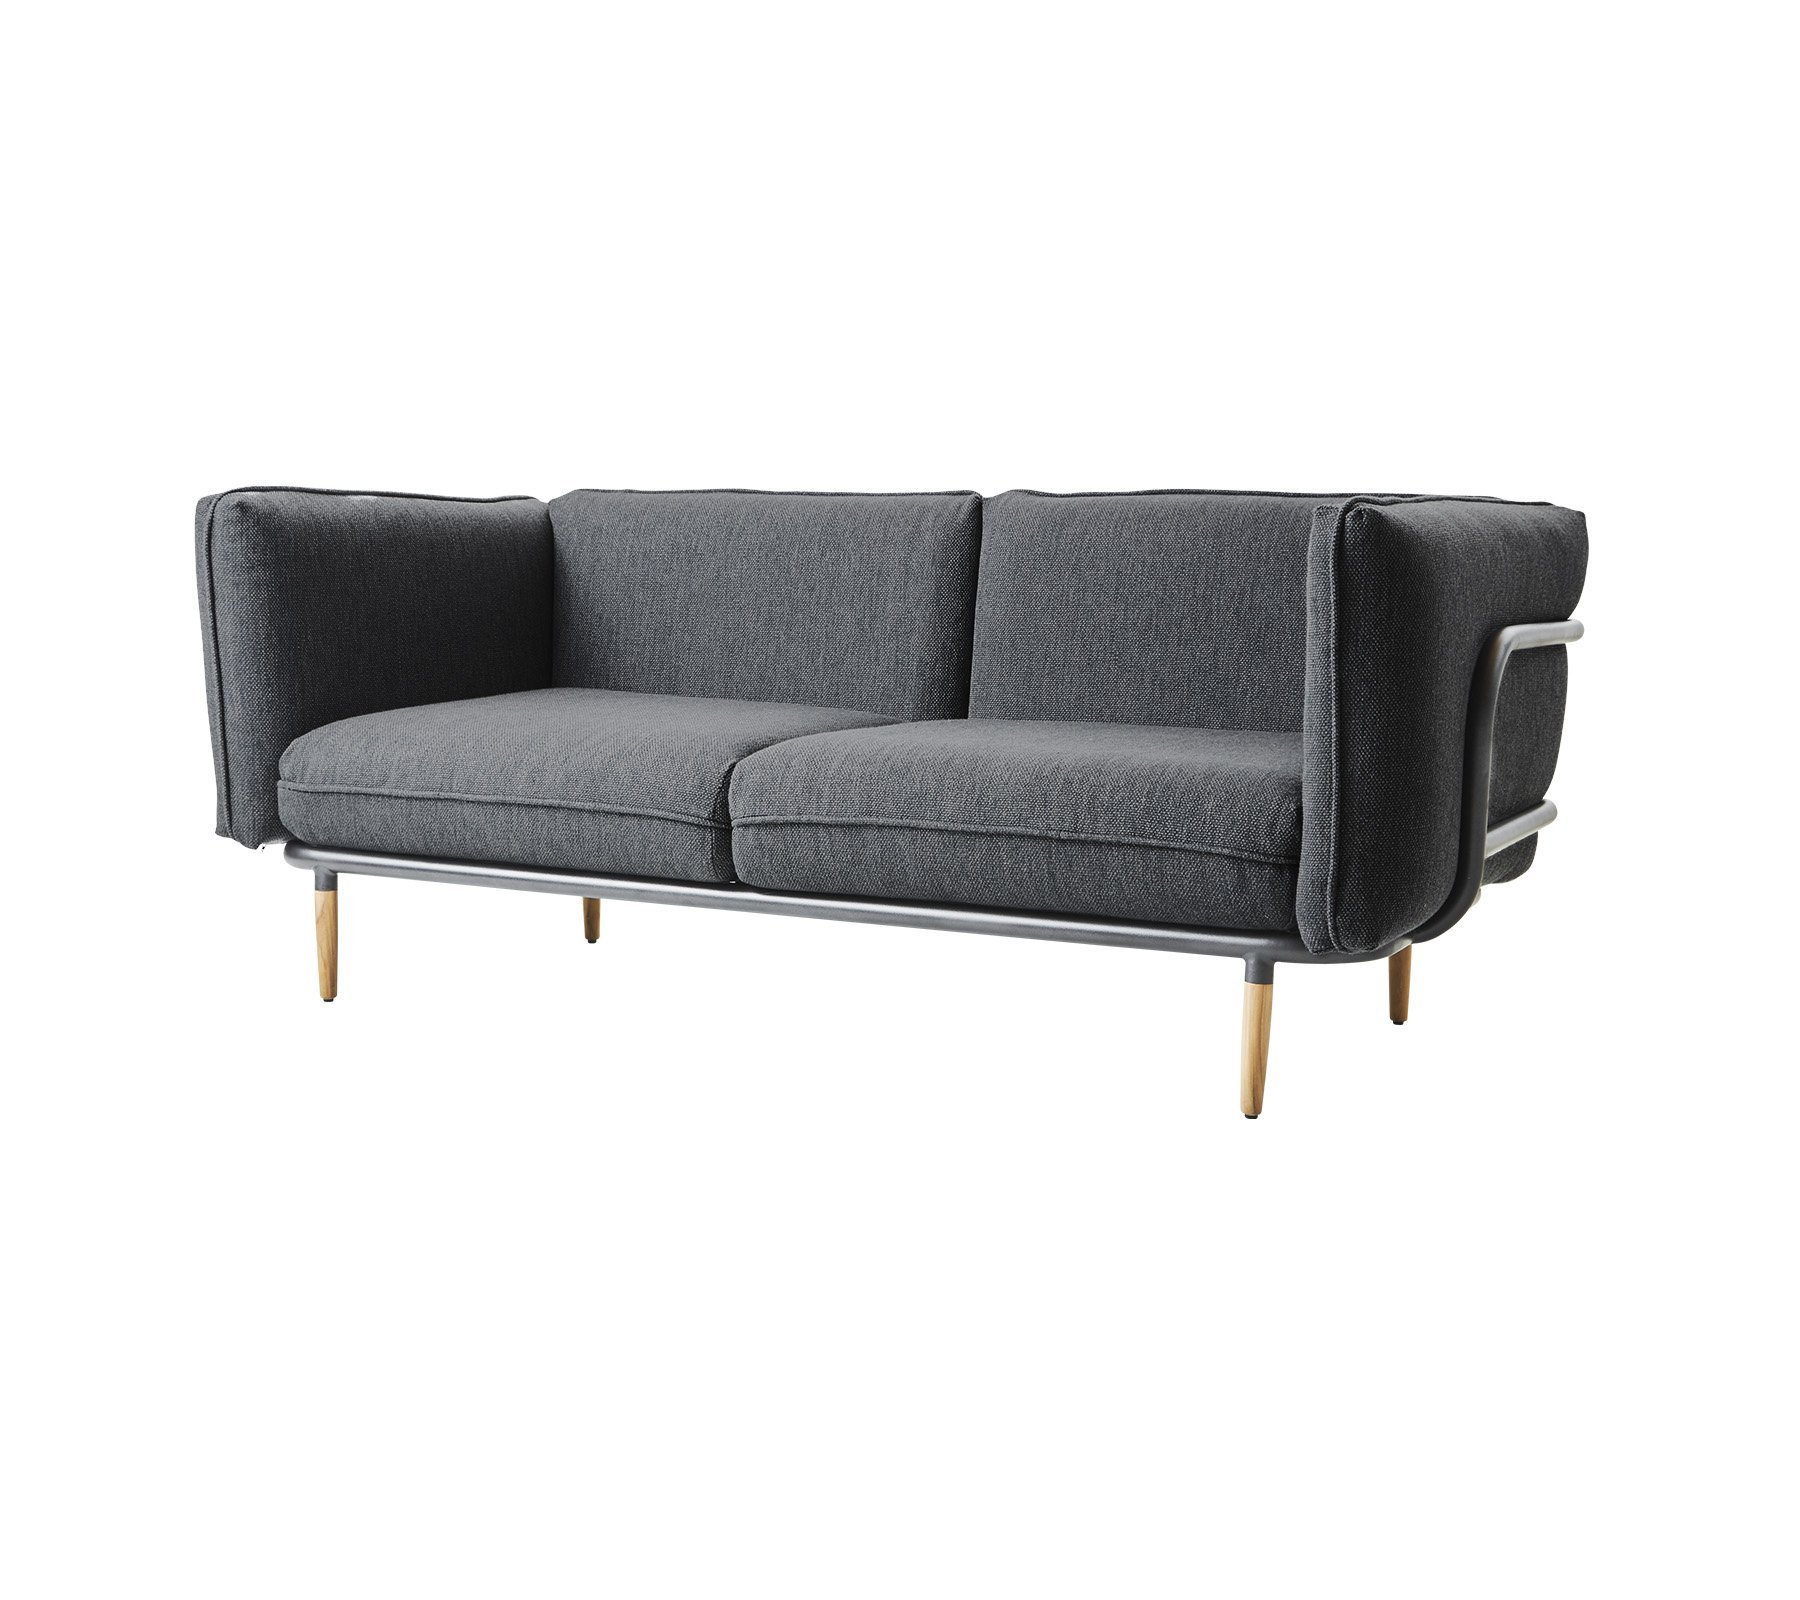 Urban 3-Seat Sofa from Cane-line, designed by byKATO